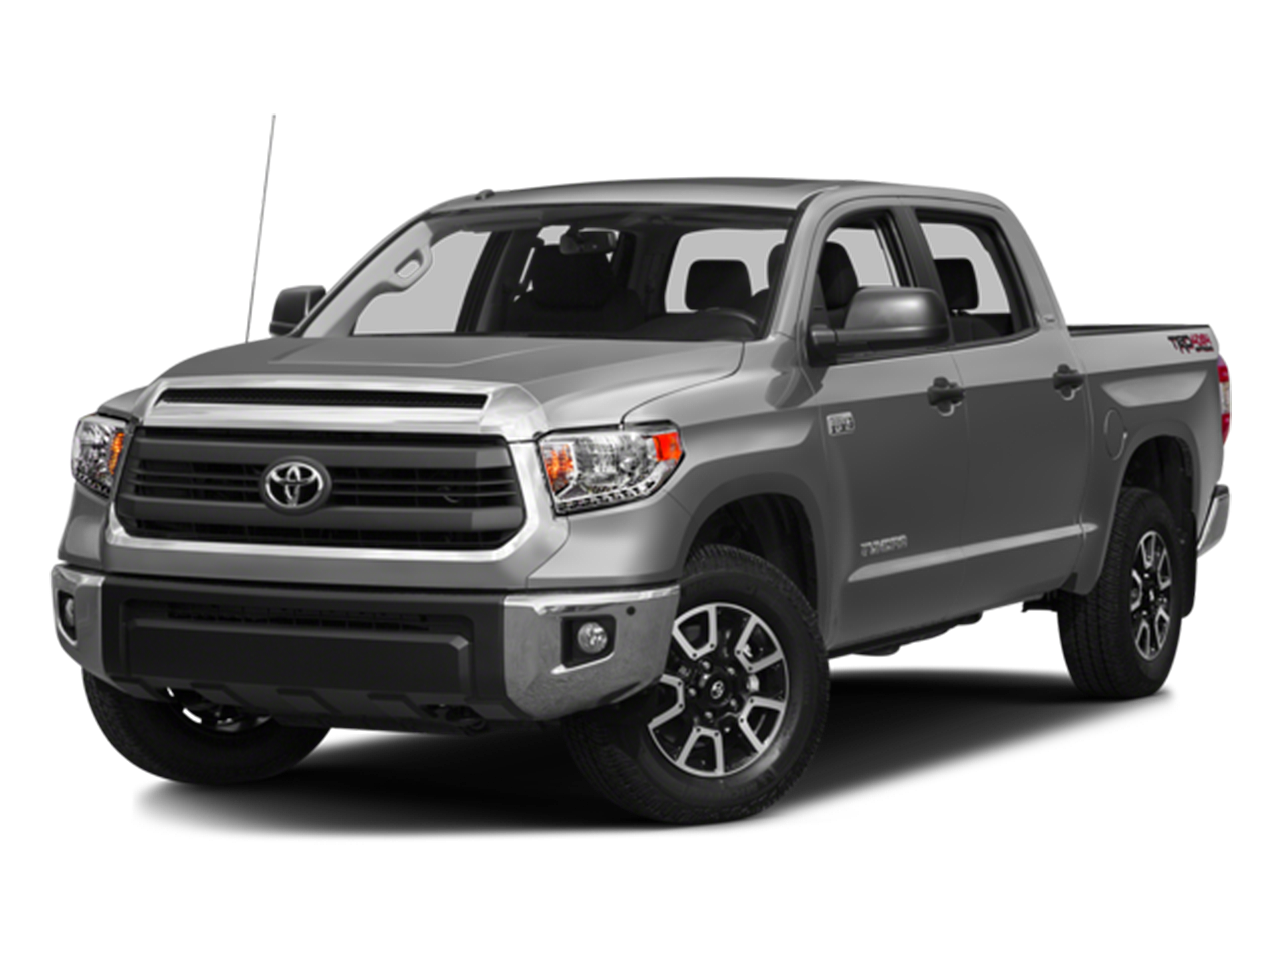 2016 Toyota Tundra Dealer Serving Oakland and San Jose | Livermore Toyota